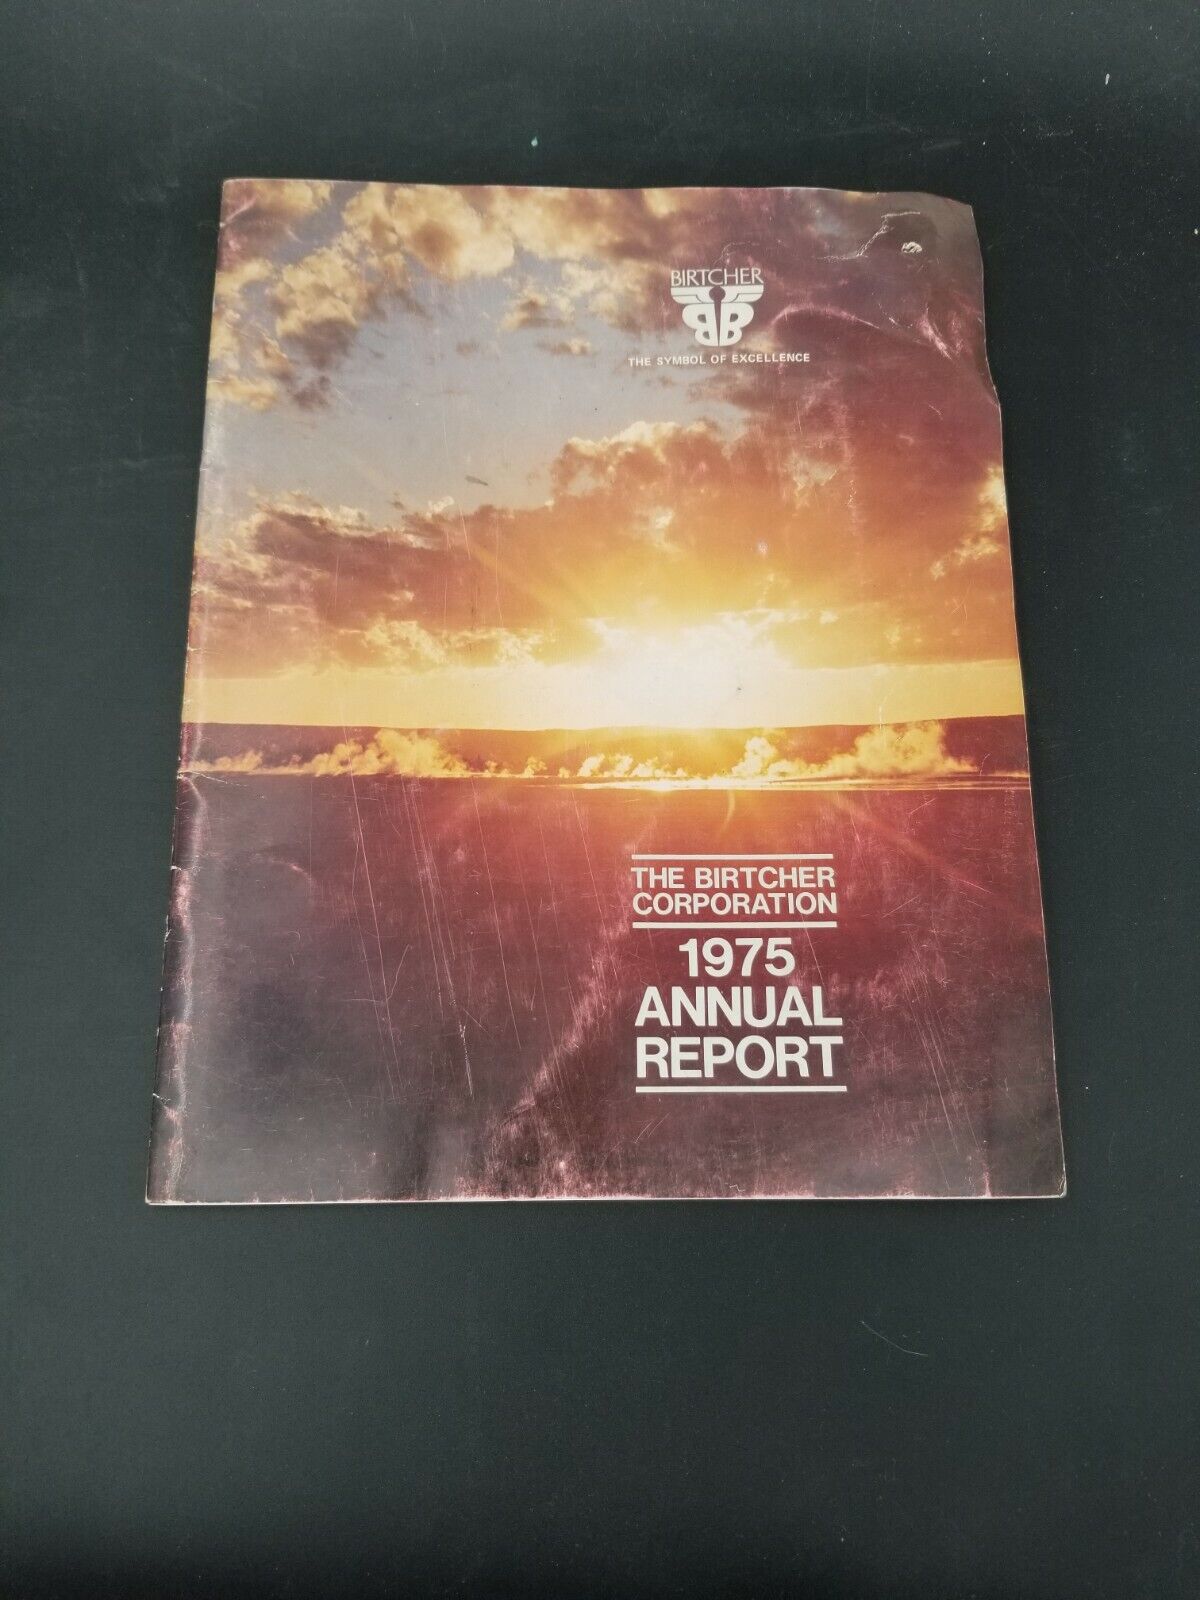 The Birtcher Corporation 1975 Annual Report A Symbol of Excellance